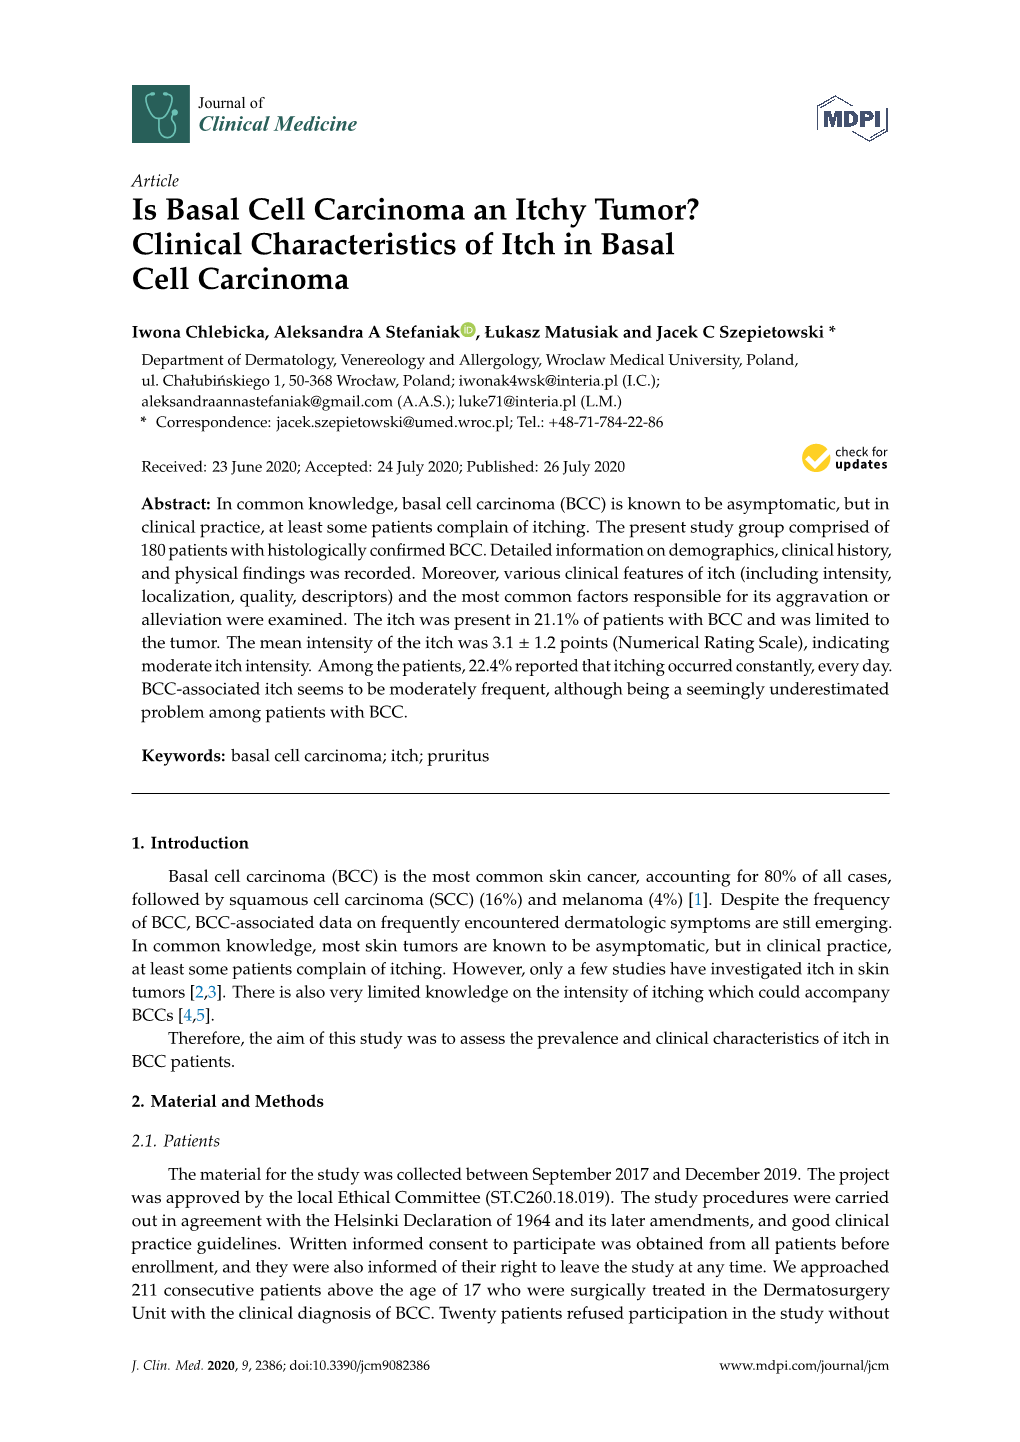 Is Basal Cell Carcinoma an Itchy Tumor? Clinical Characteristics of Itch in Basal Cell Carcinoma